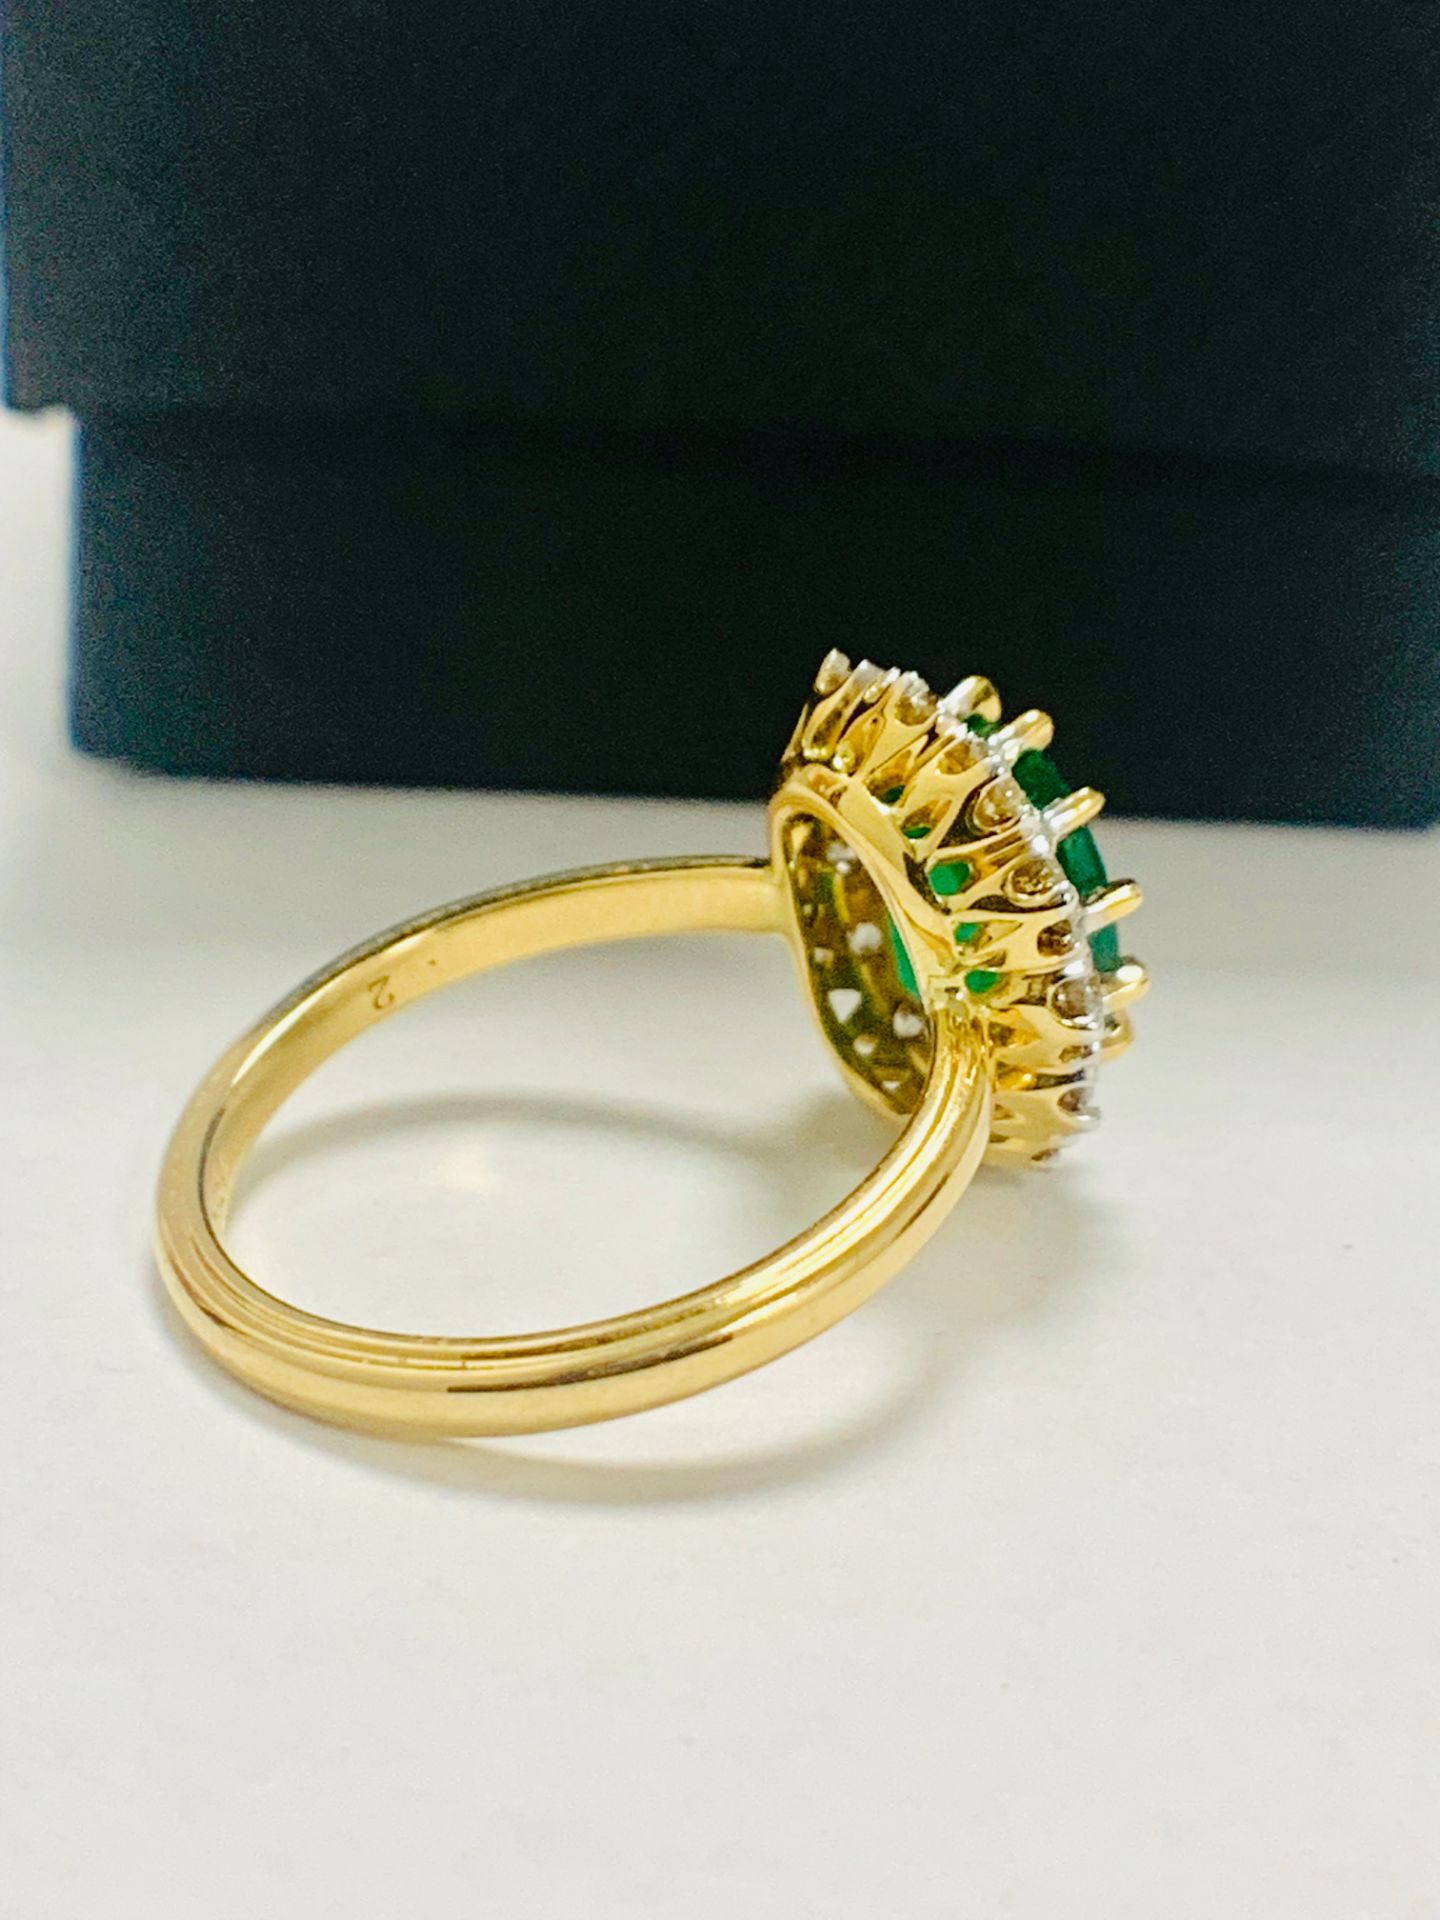 14ct Yellow Gold Emerald and Diamond Ring Featuring Centre, Oval Cut, Dark Green Emerald - Image 6 of 12